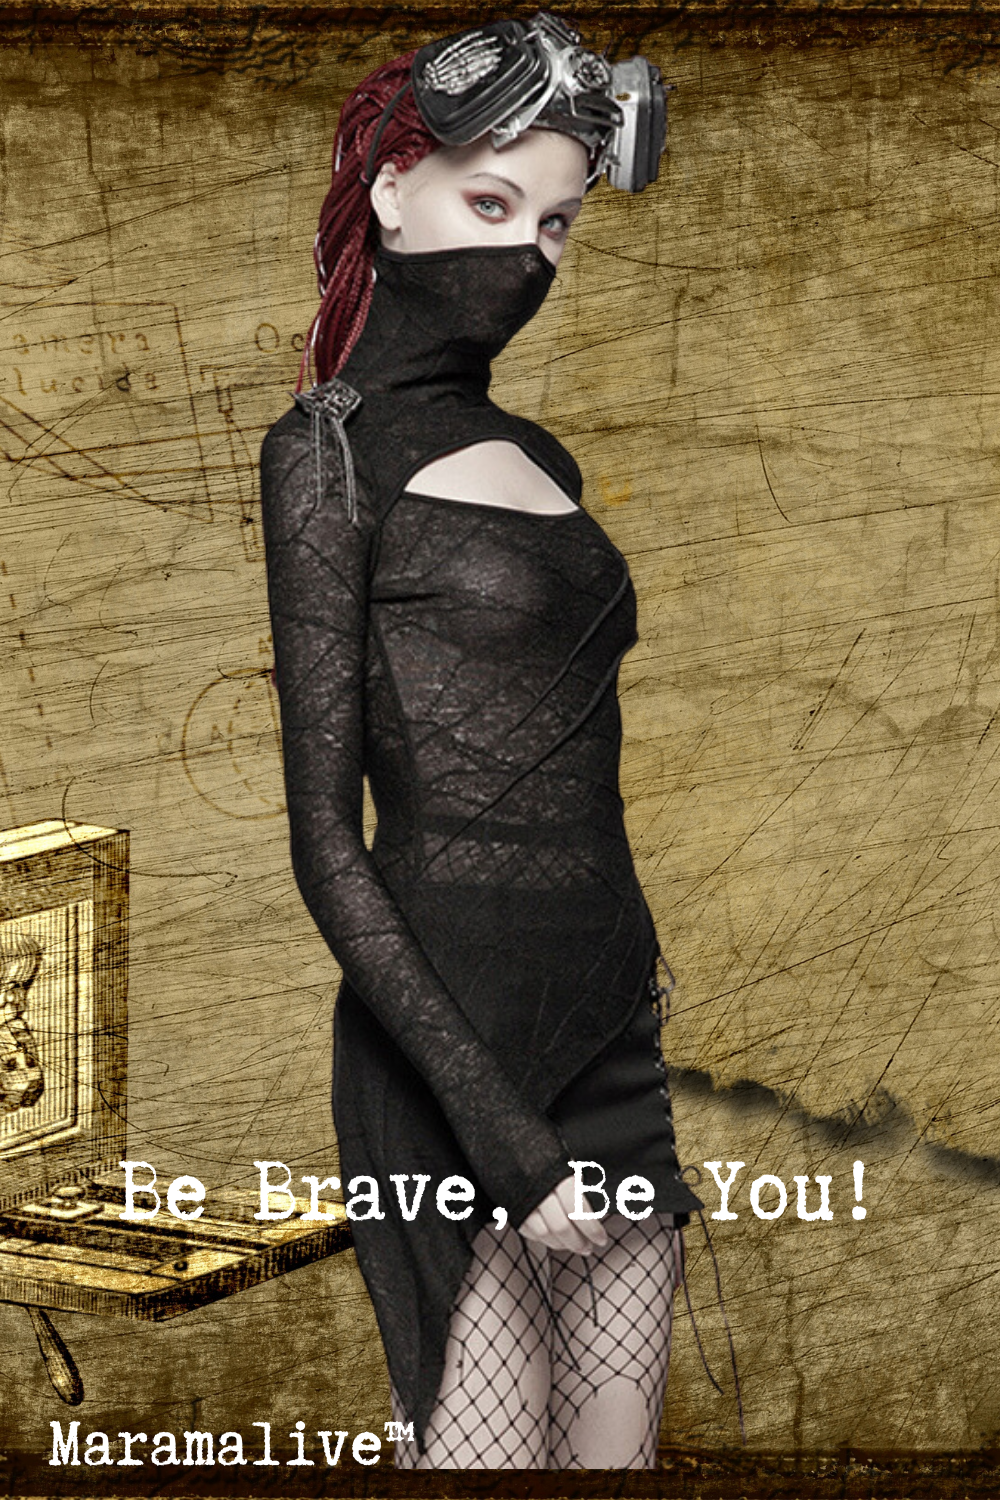 A Maramalive™ woman in a Unique Gothic Lace Shirt: Unusual Peek-a-boo Long Sleeve Top with fishnet stockings.